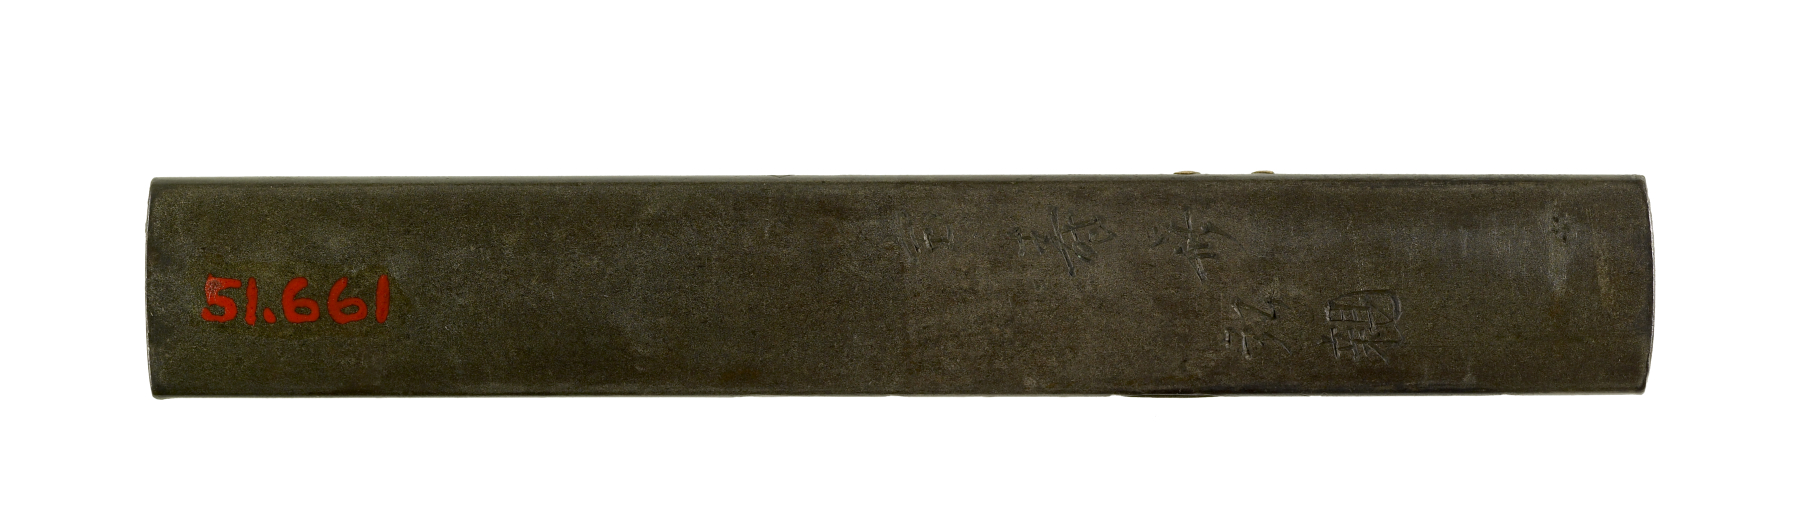 Image for Kozuka with the Oil Monk